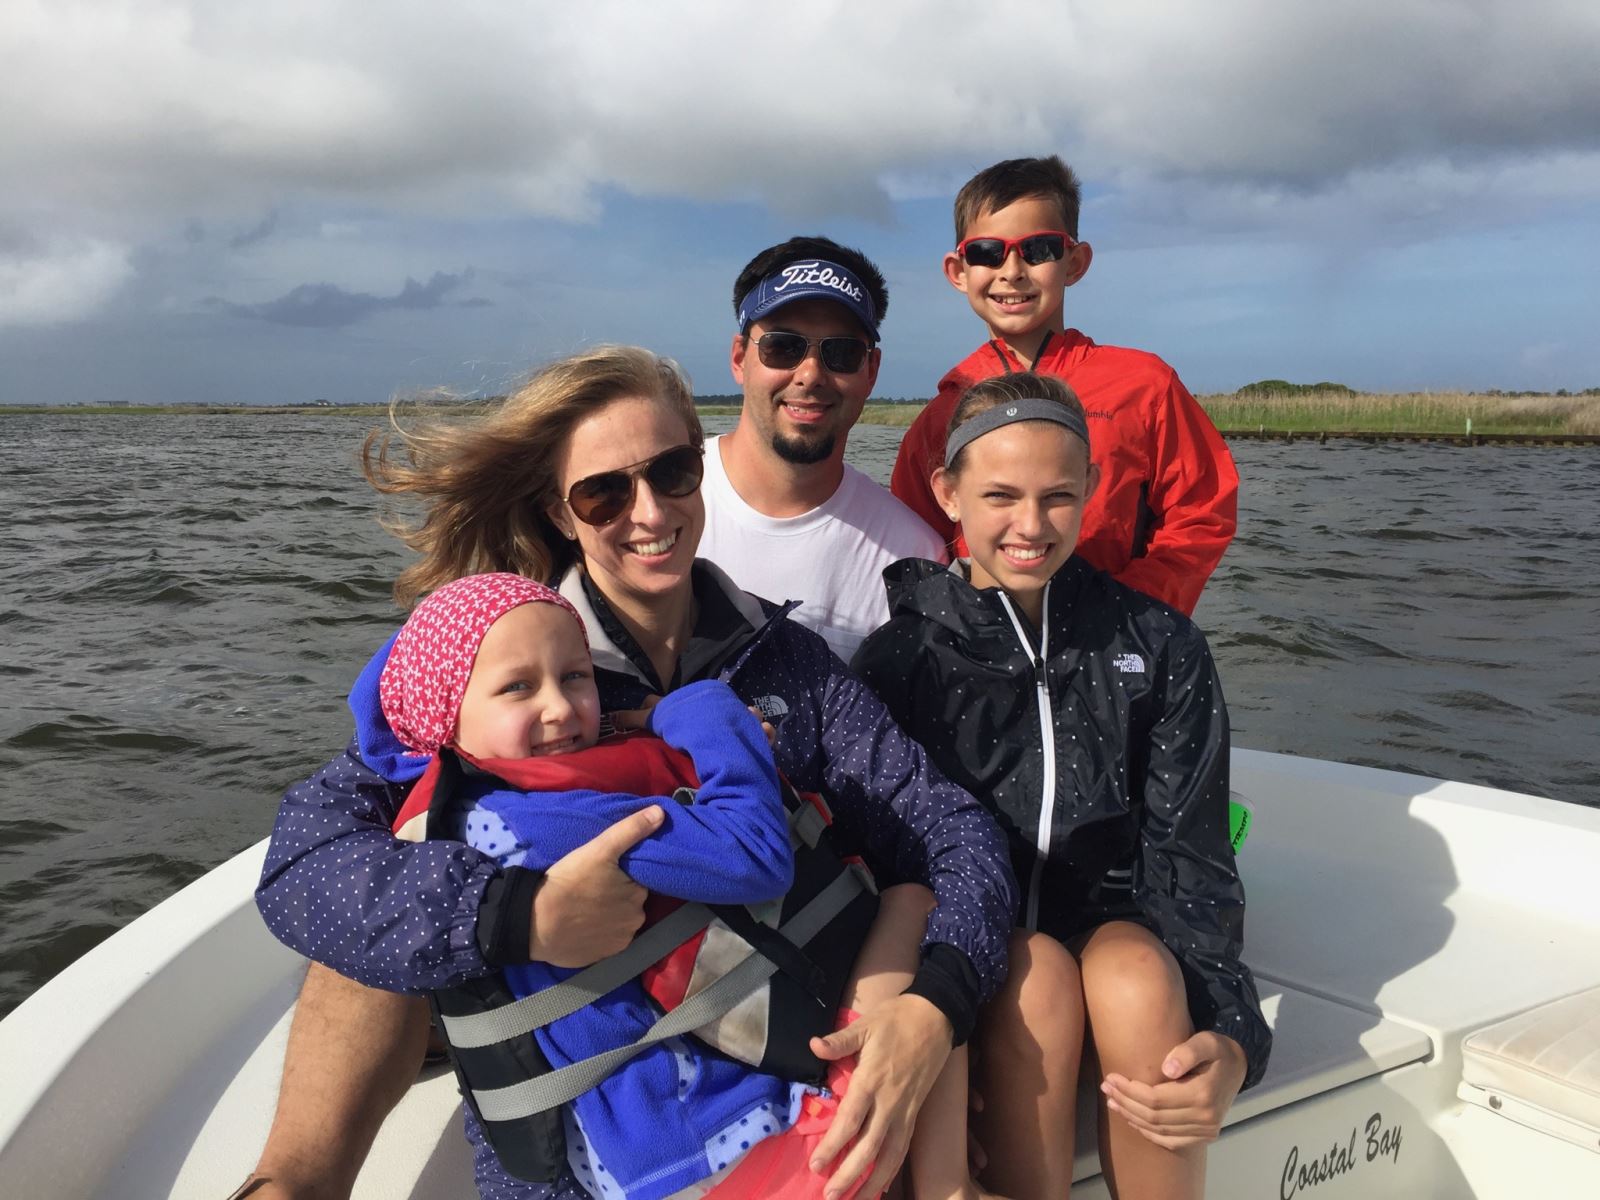 Spending time with her family, pictured here in North Carolina’s Outer Banks, allowed Lauren Cherry to enjoy regular childhood experiences during her cancer treatment at CHoR. 